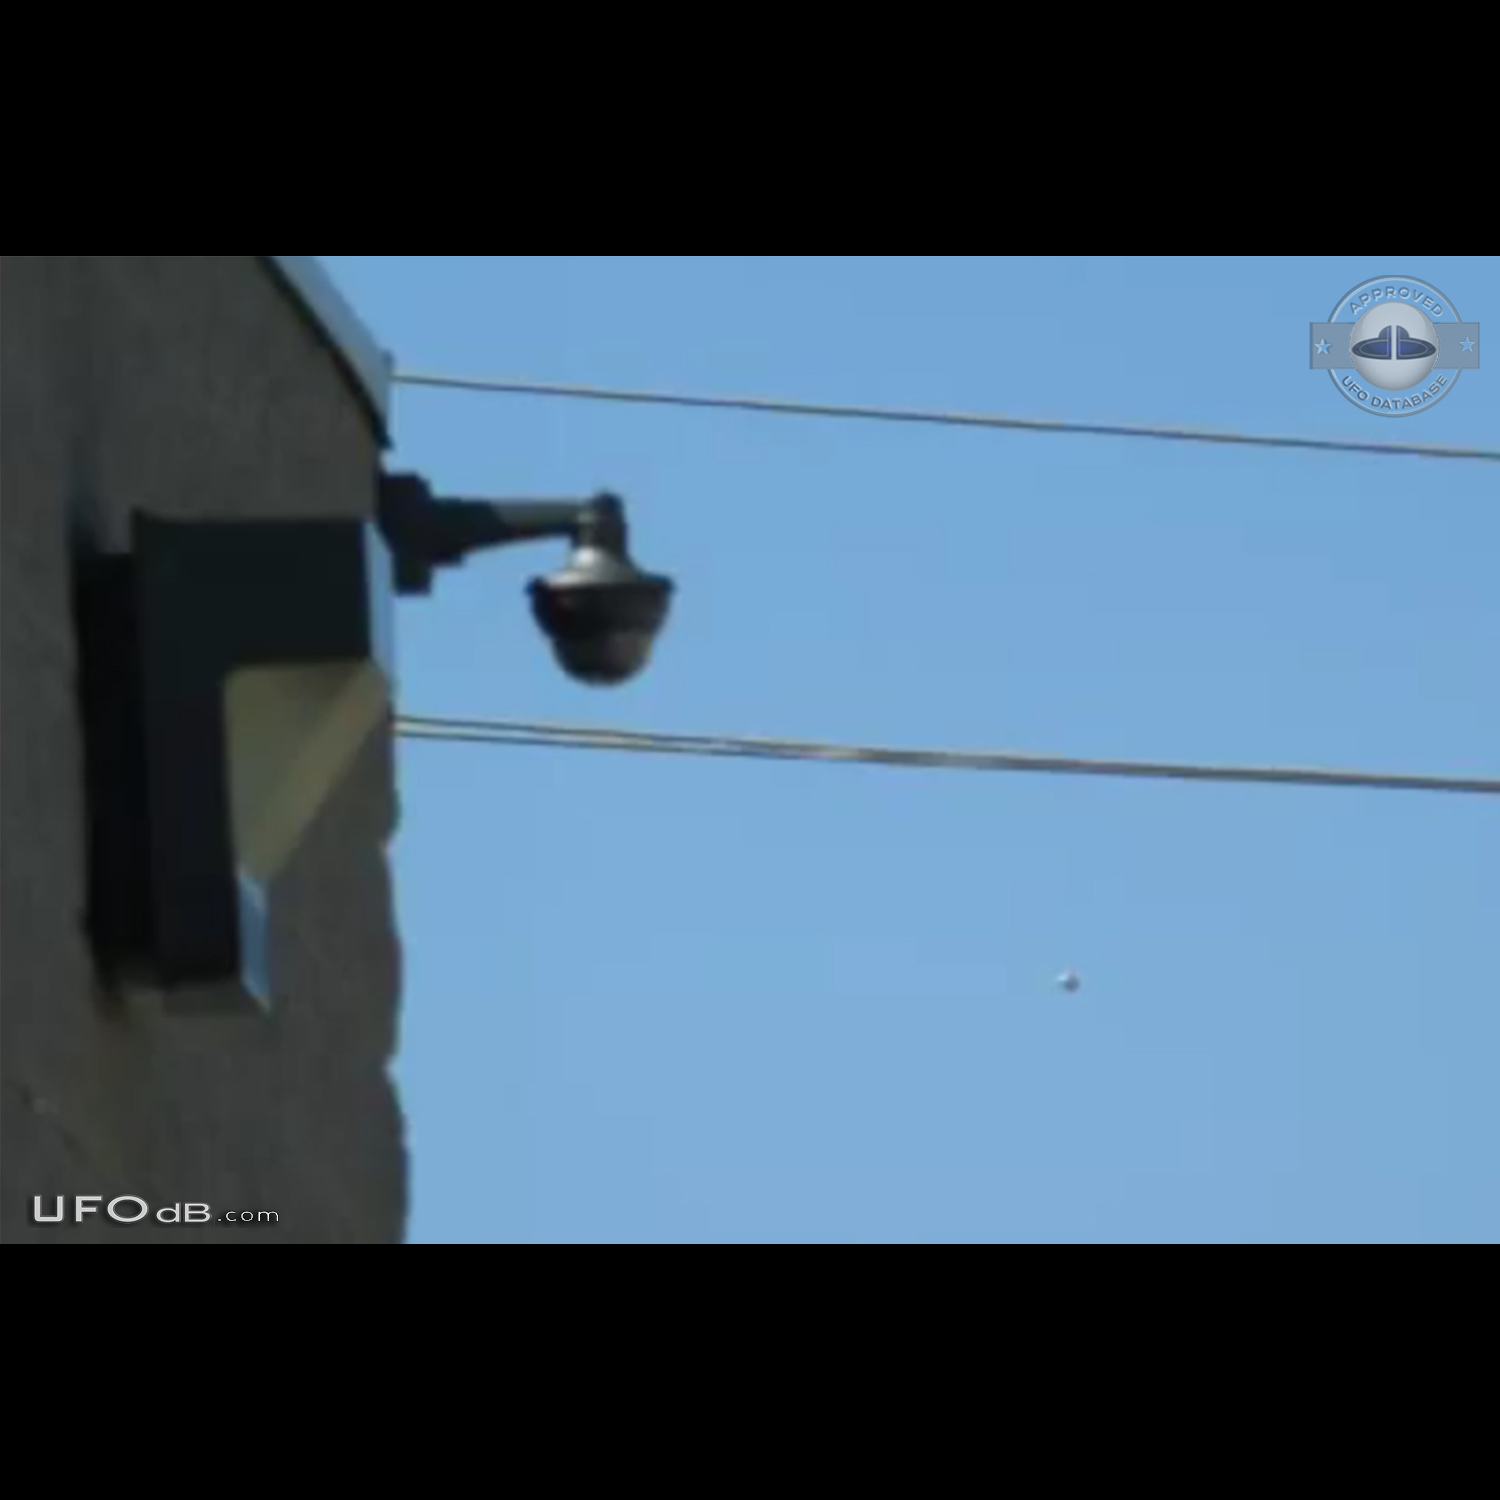 Jerky and strange UFO seen in Scarborough, Ontario canada 2015 UFO Picture #685-1